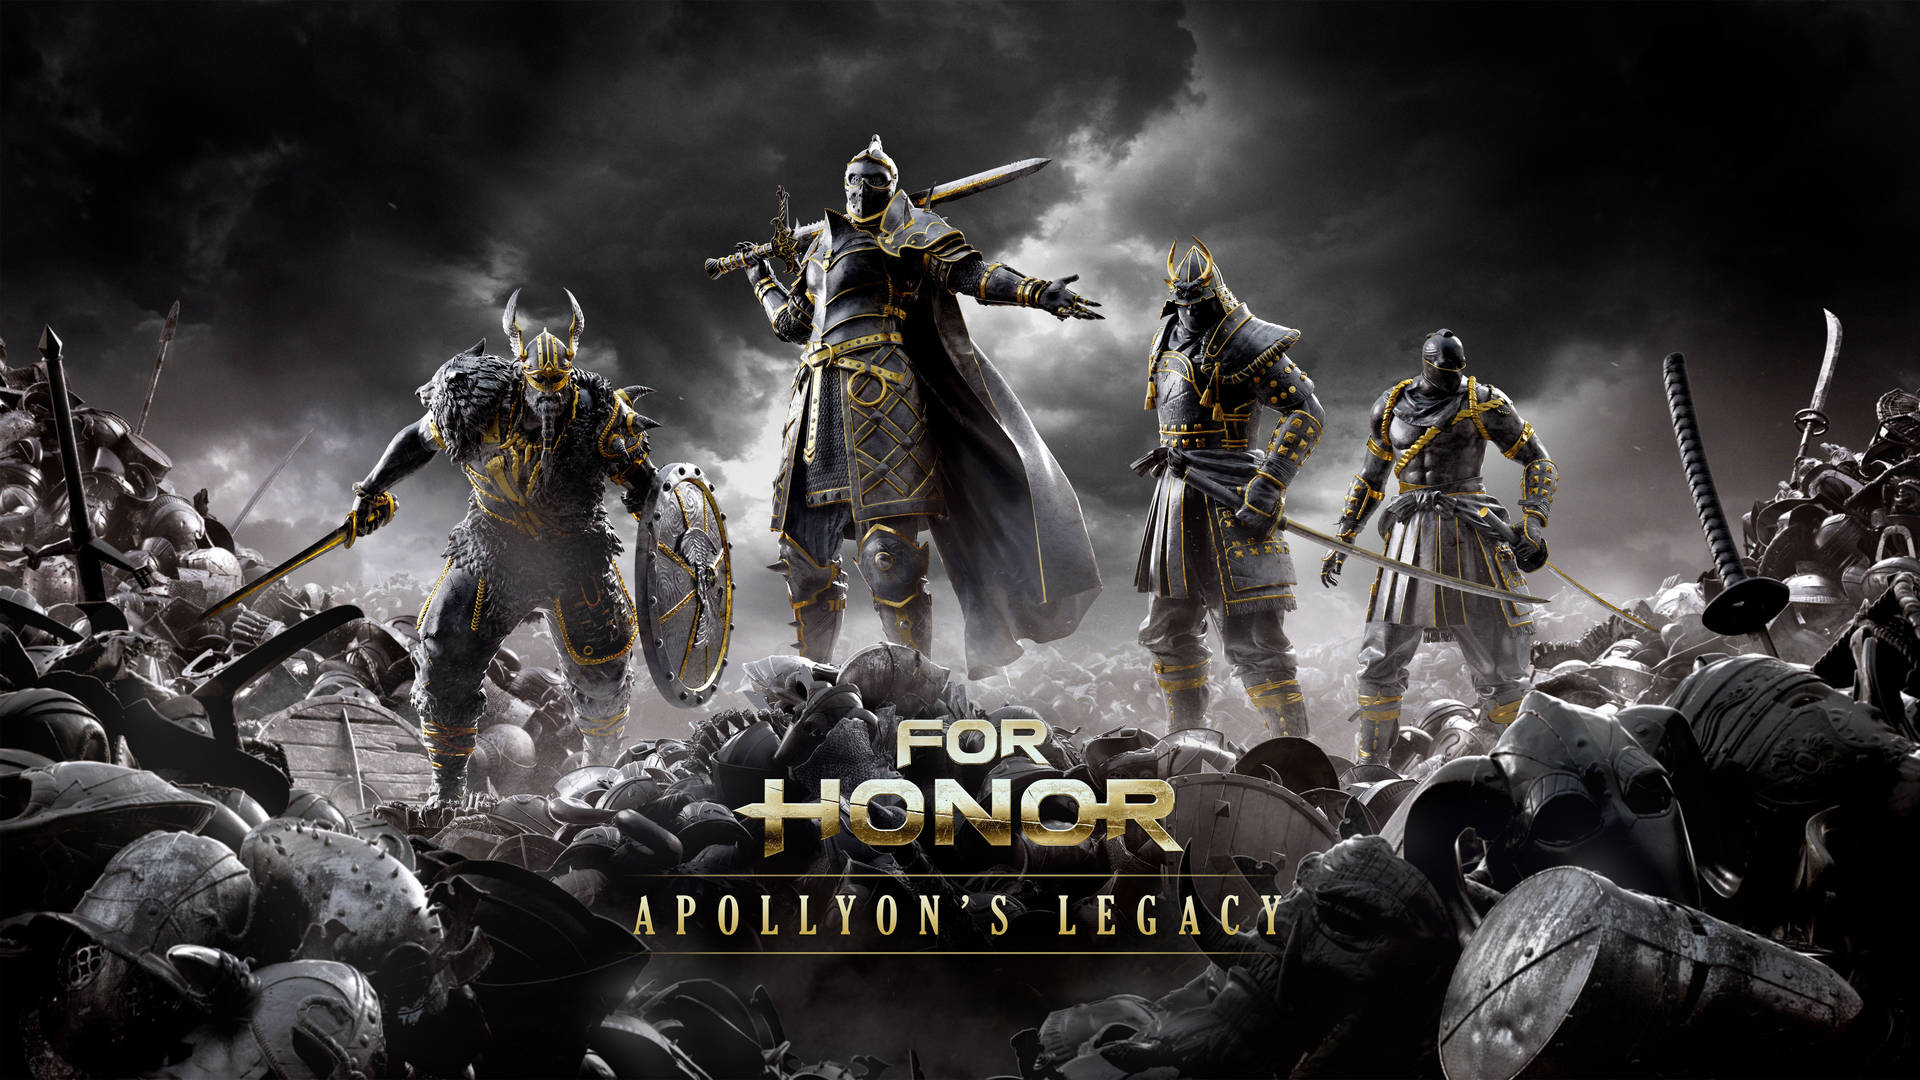 For Honor Apollyon's Legacy Poster